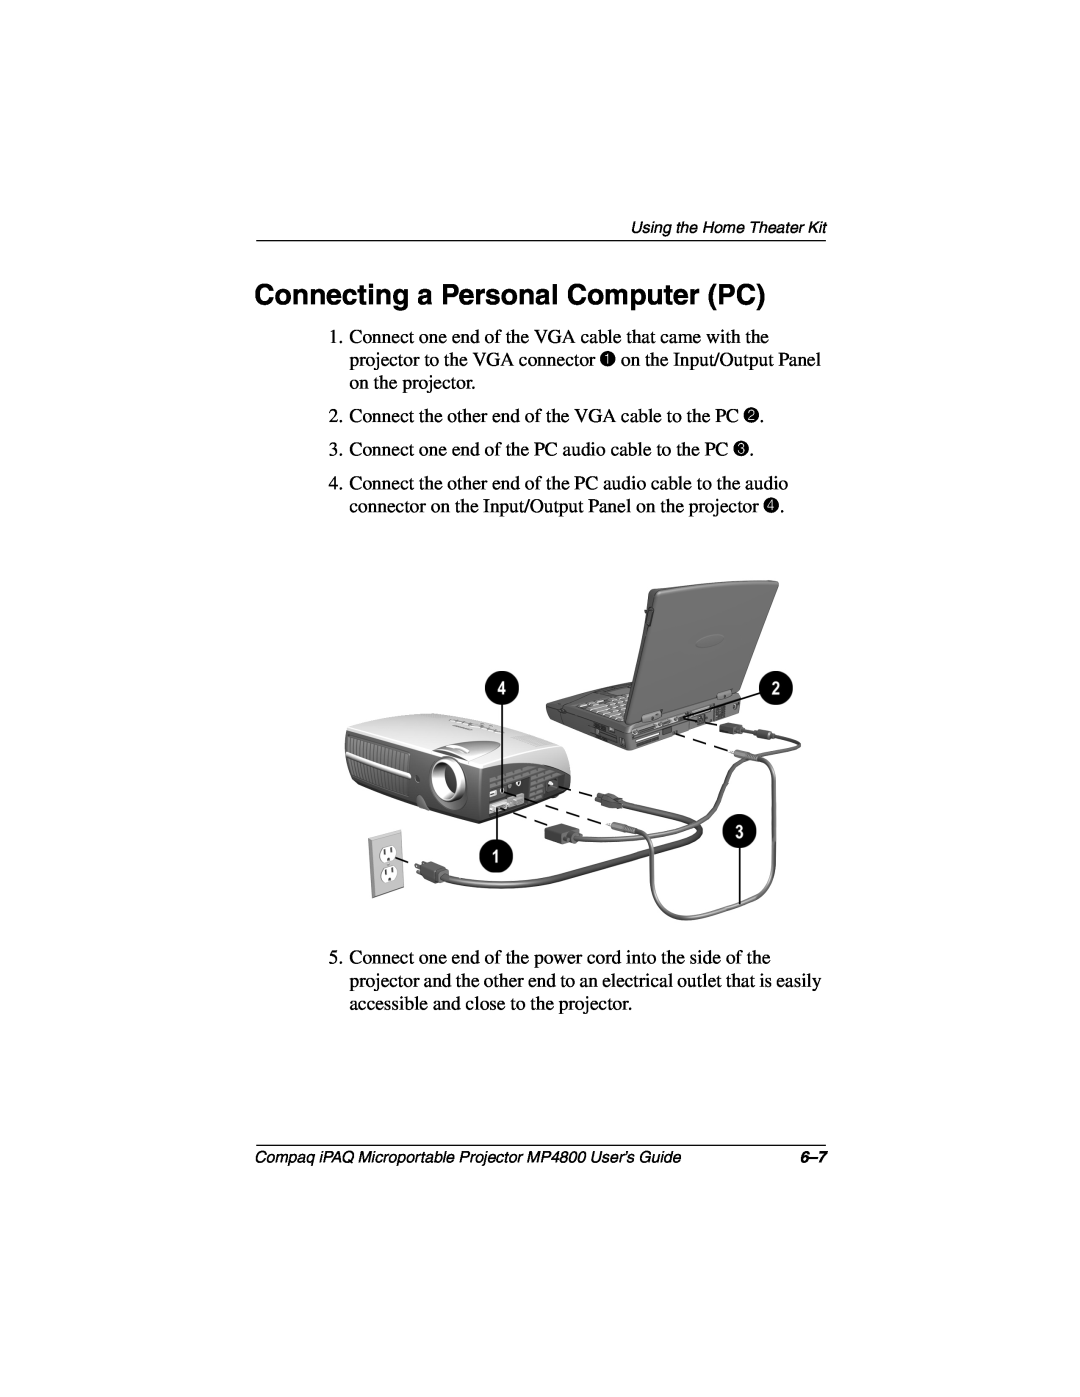 Compaq MP4800 manual Connecting a Personal Computer PC 